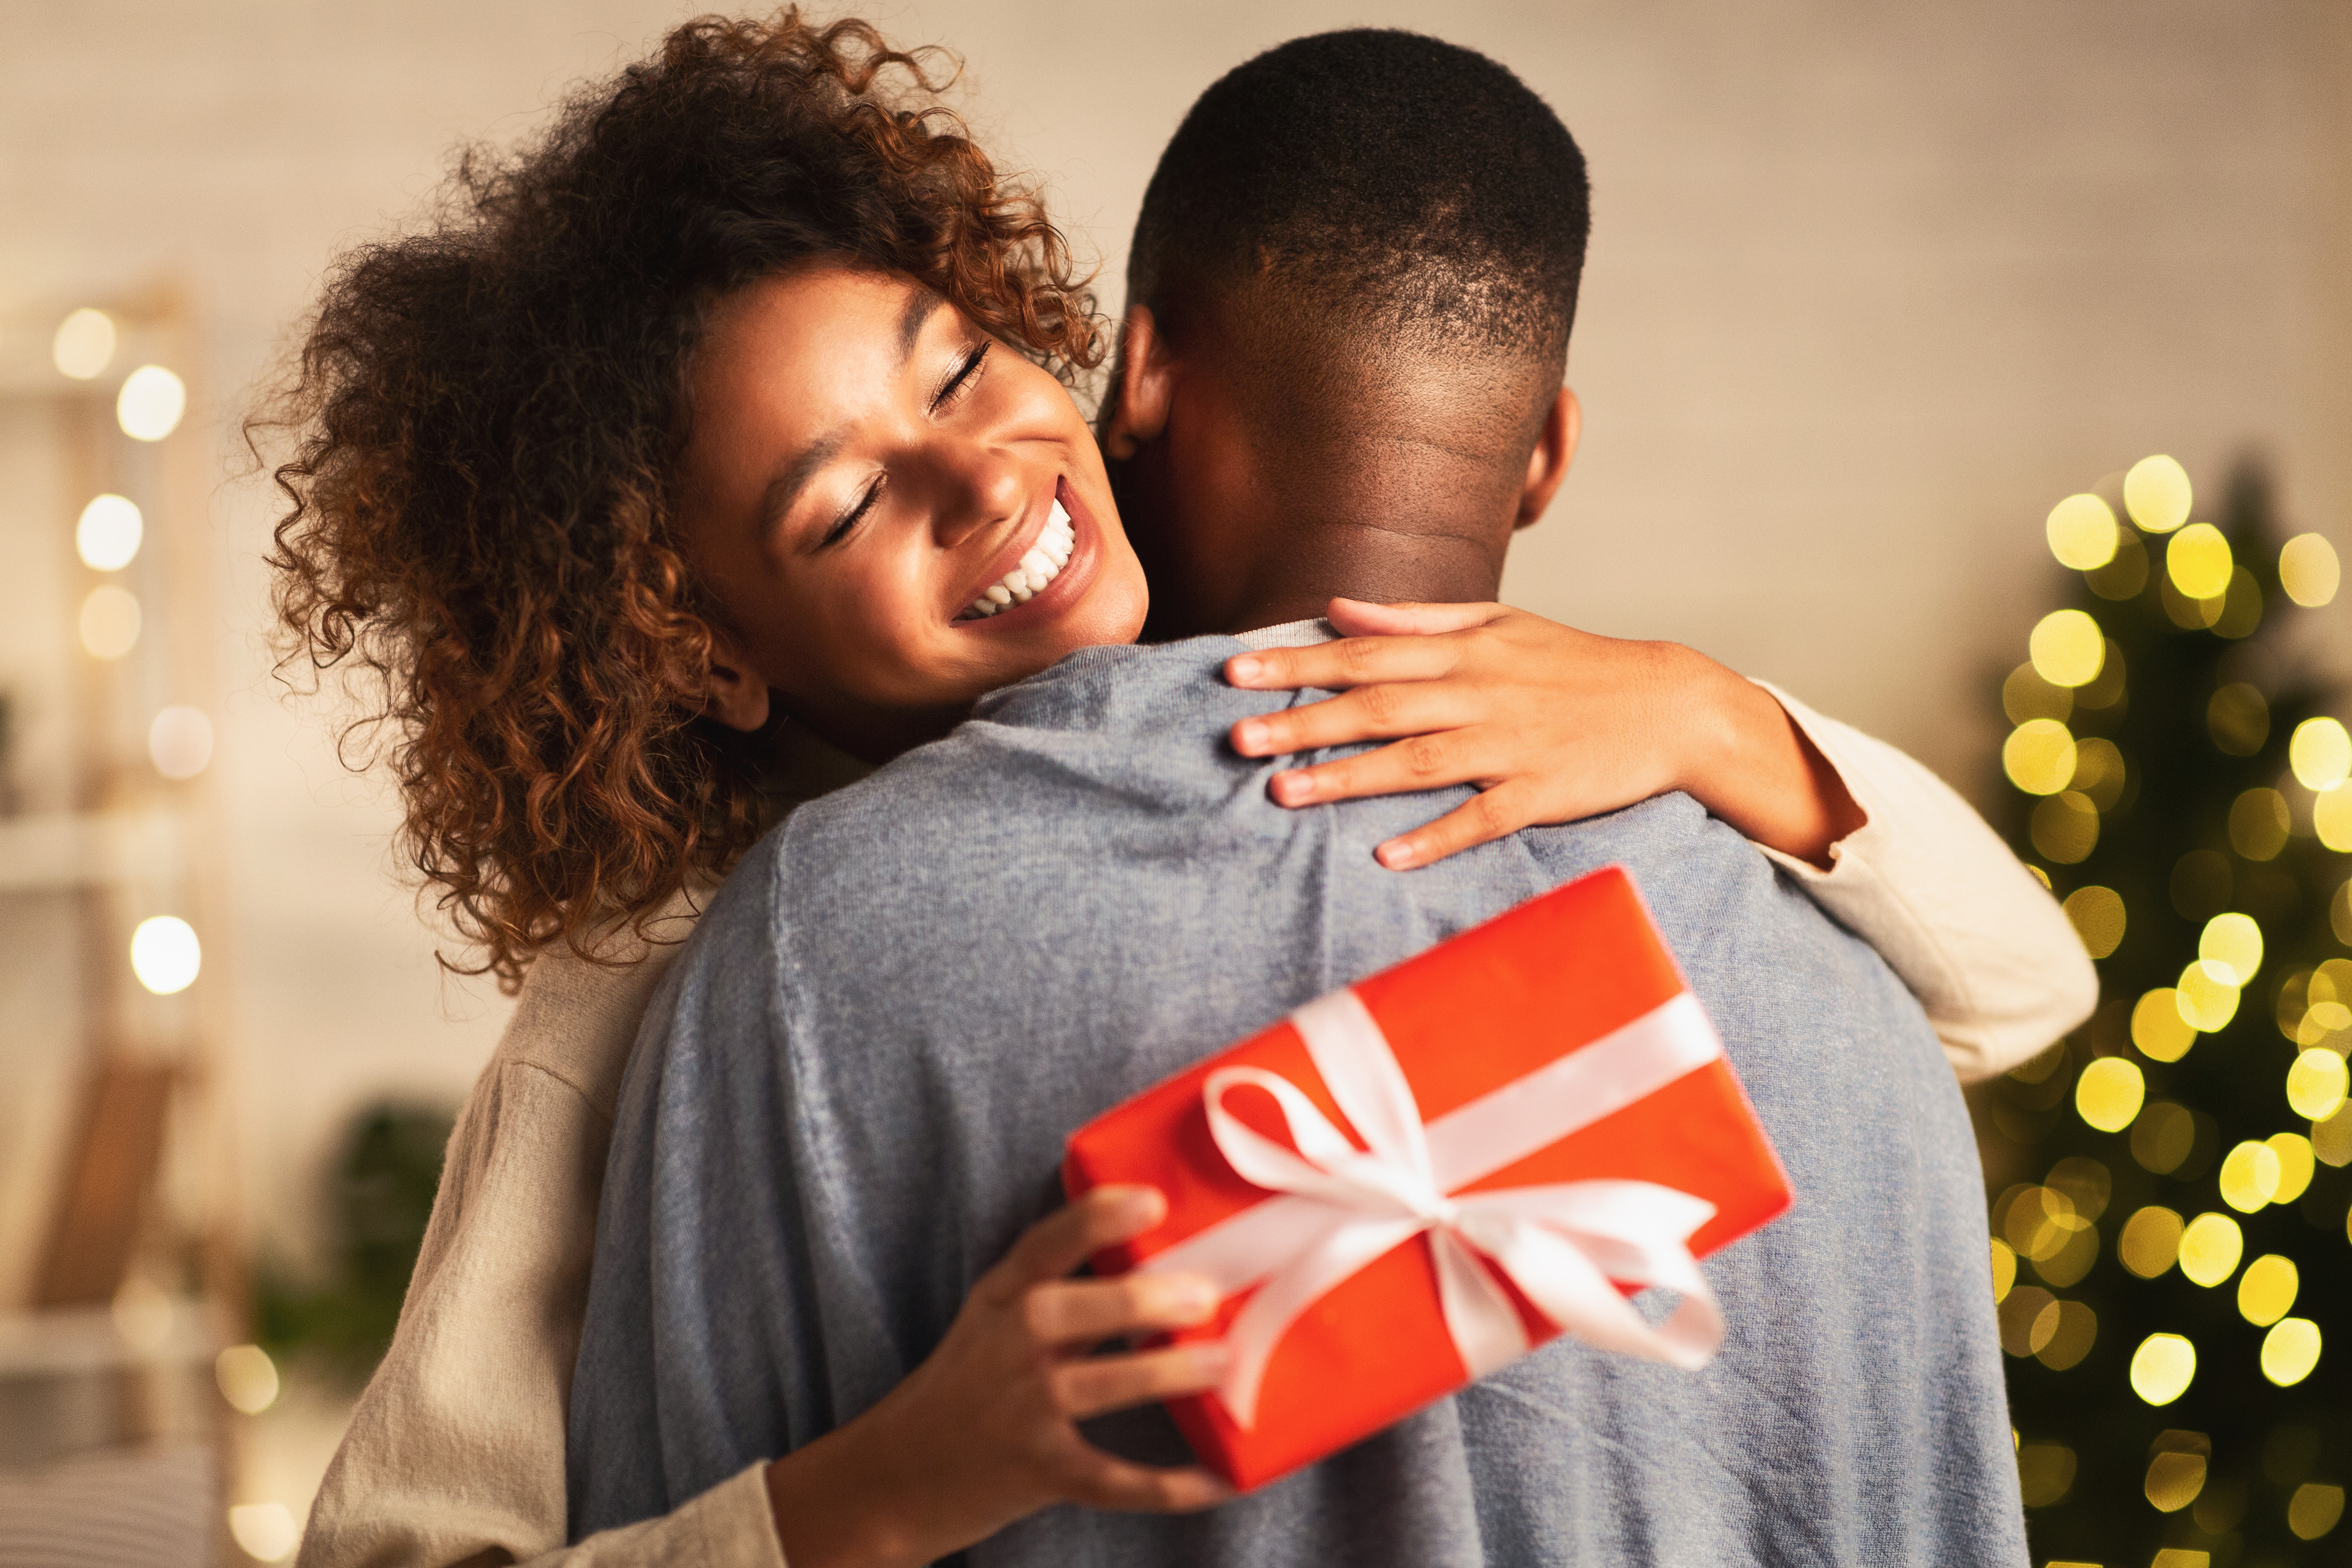 MONEY HACKS: How Thoughtful is Your Holiday Gift Giving?